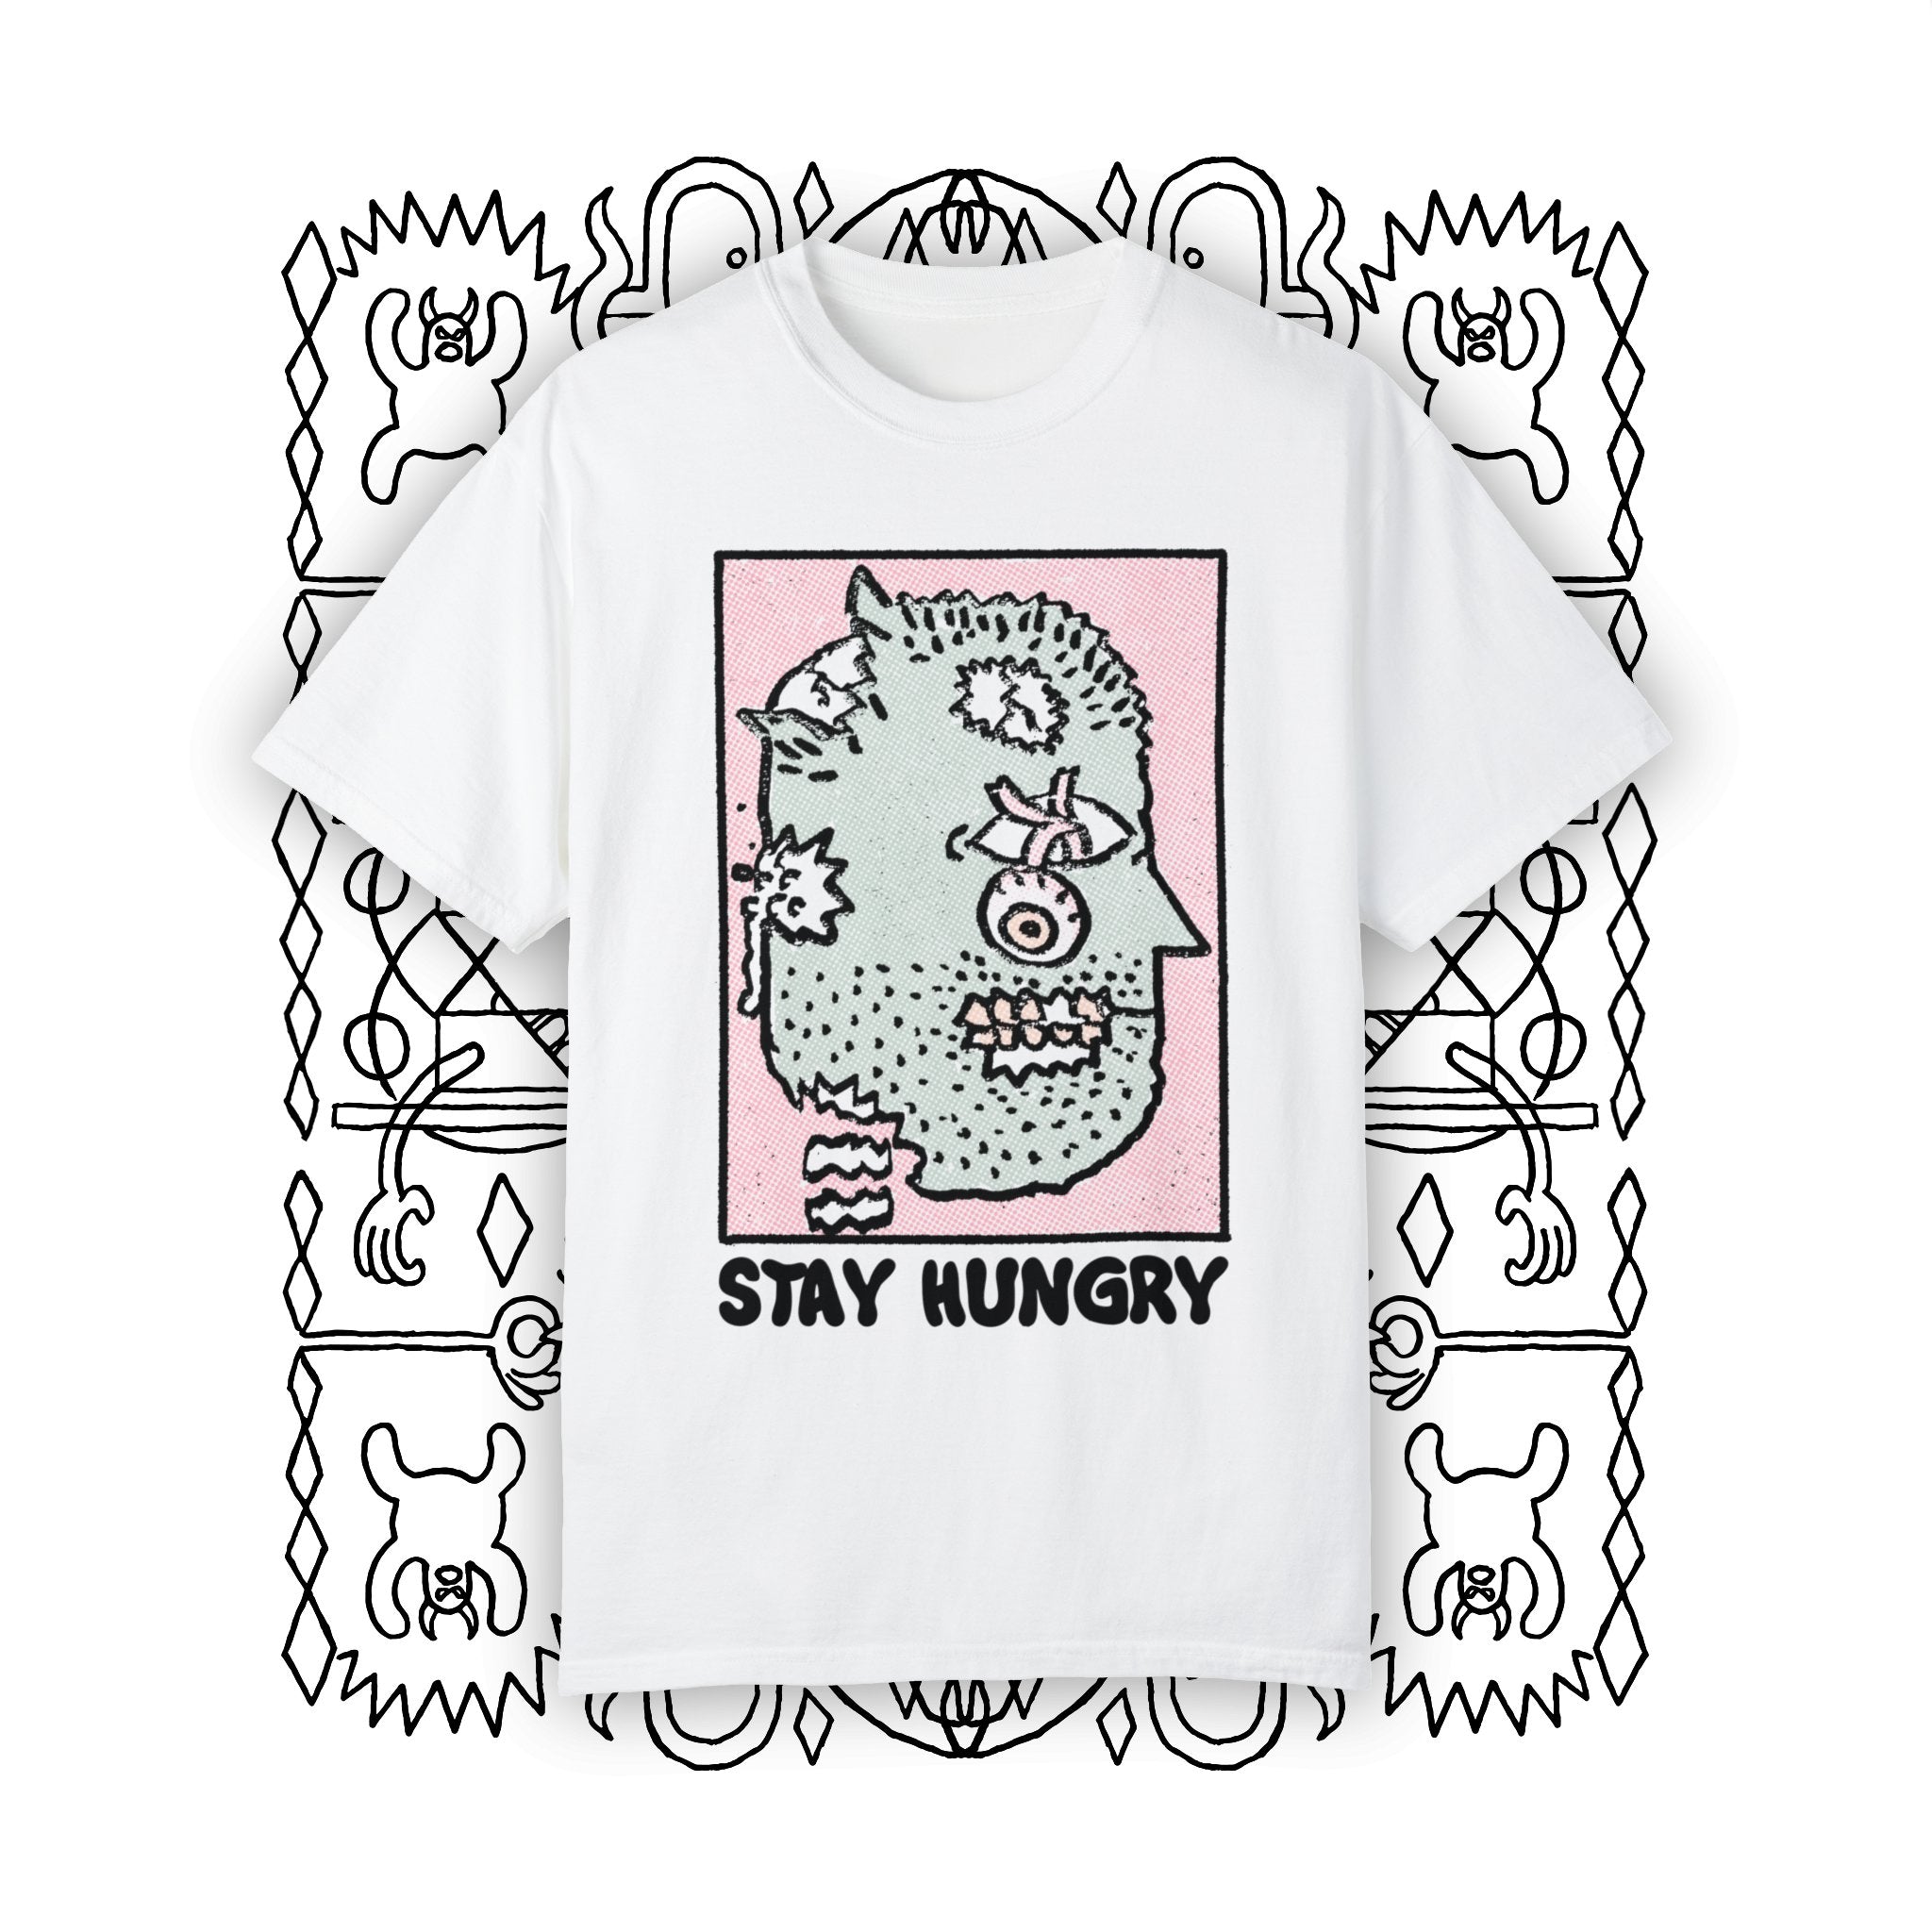 Stay Hungry | Comfort Colors Premium T-shirt - T-Shirt - Ace of Gnomes - 21604968535233729512